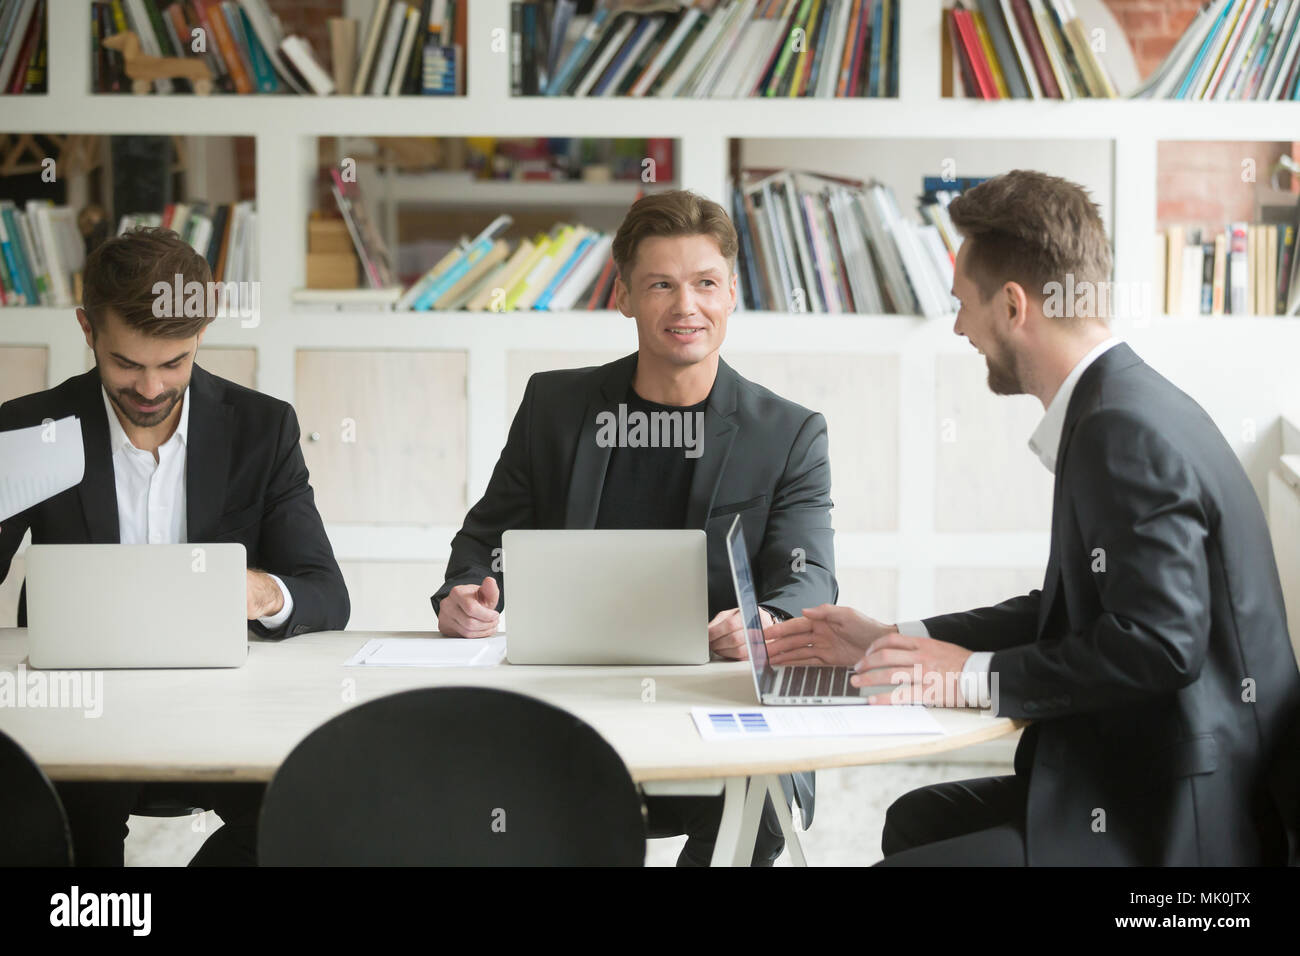 Three male colleagues brainstorming and discussing ideas Stock Photo